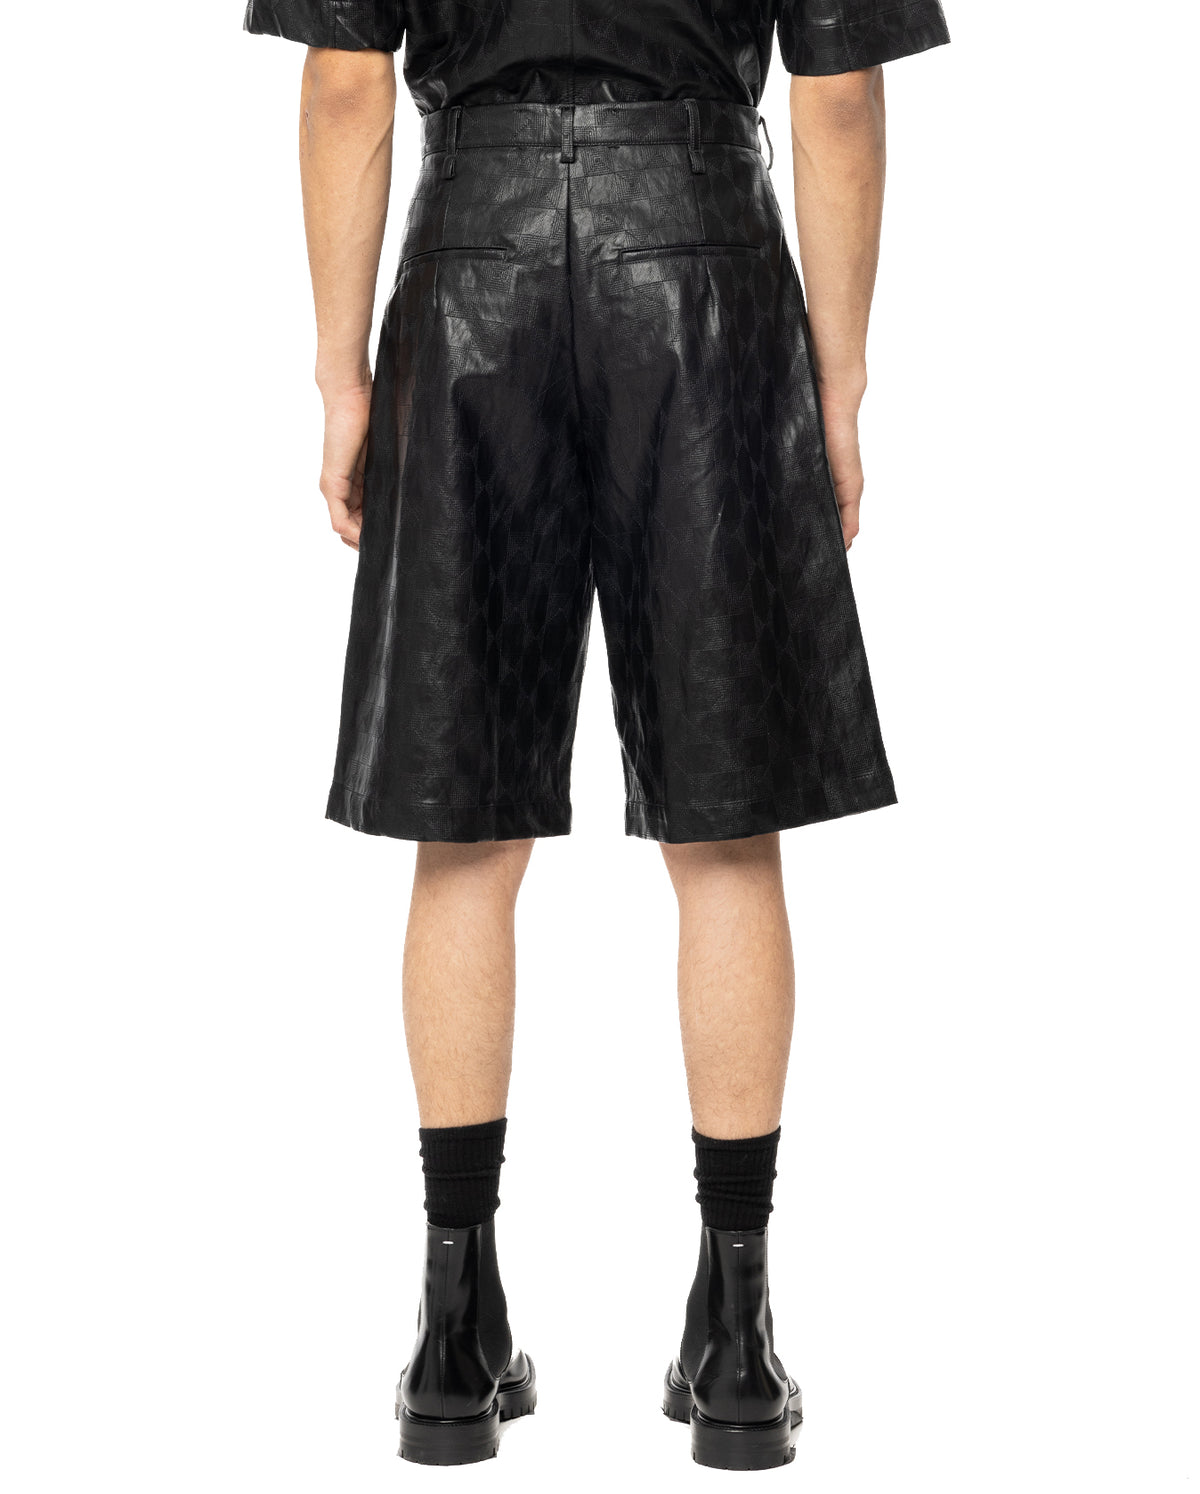 Embroidered Leather Single Pleated Shorts - Black